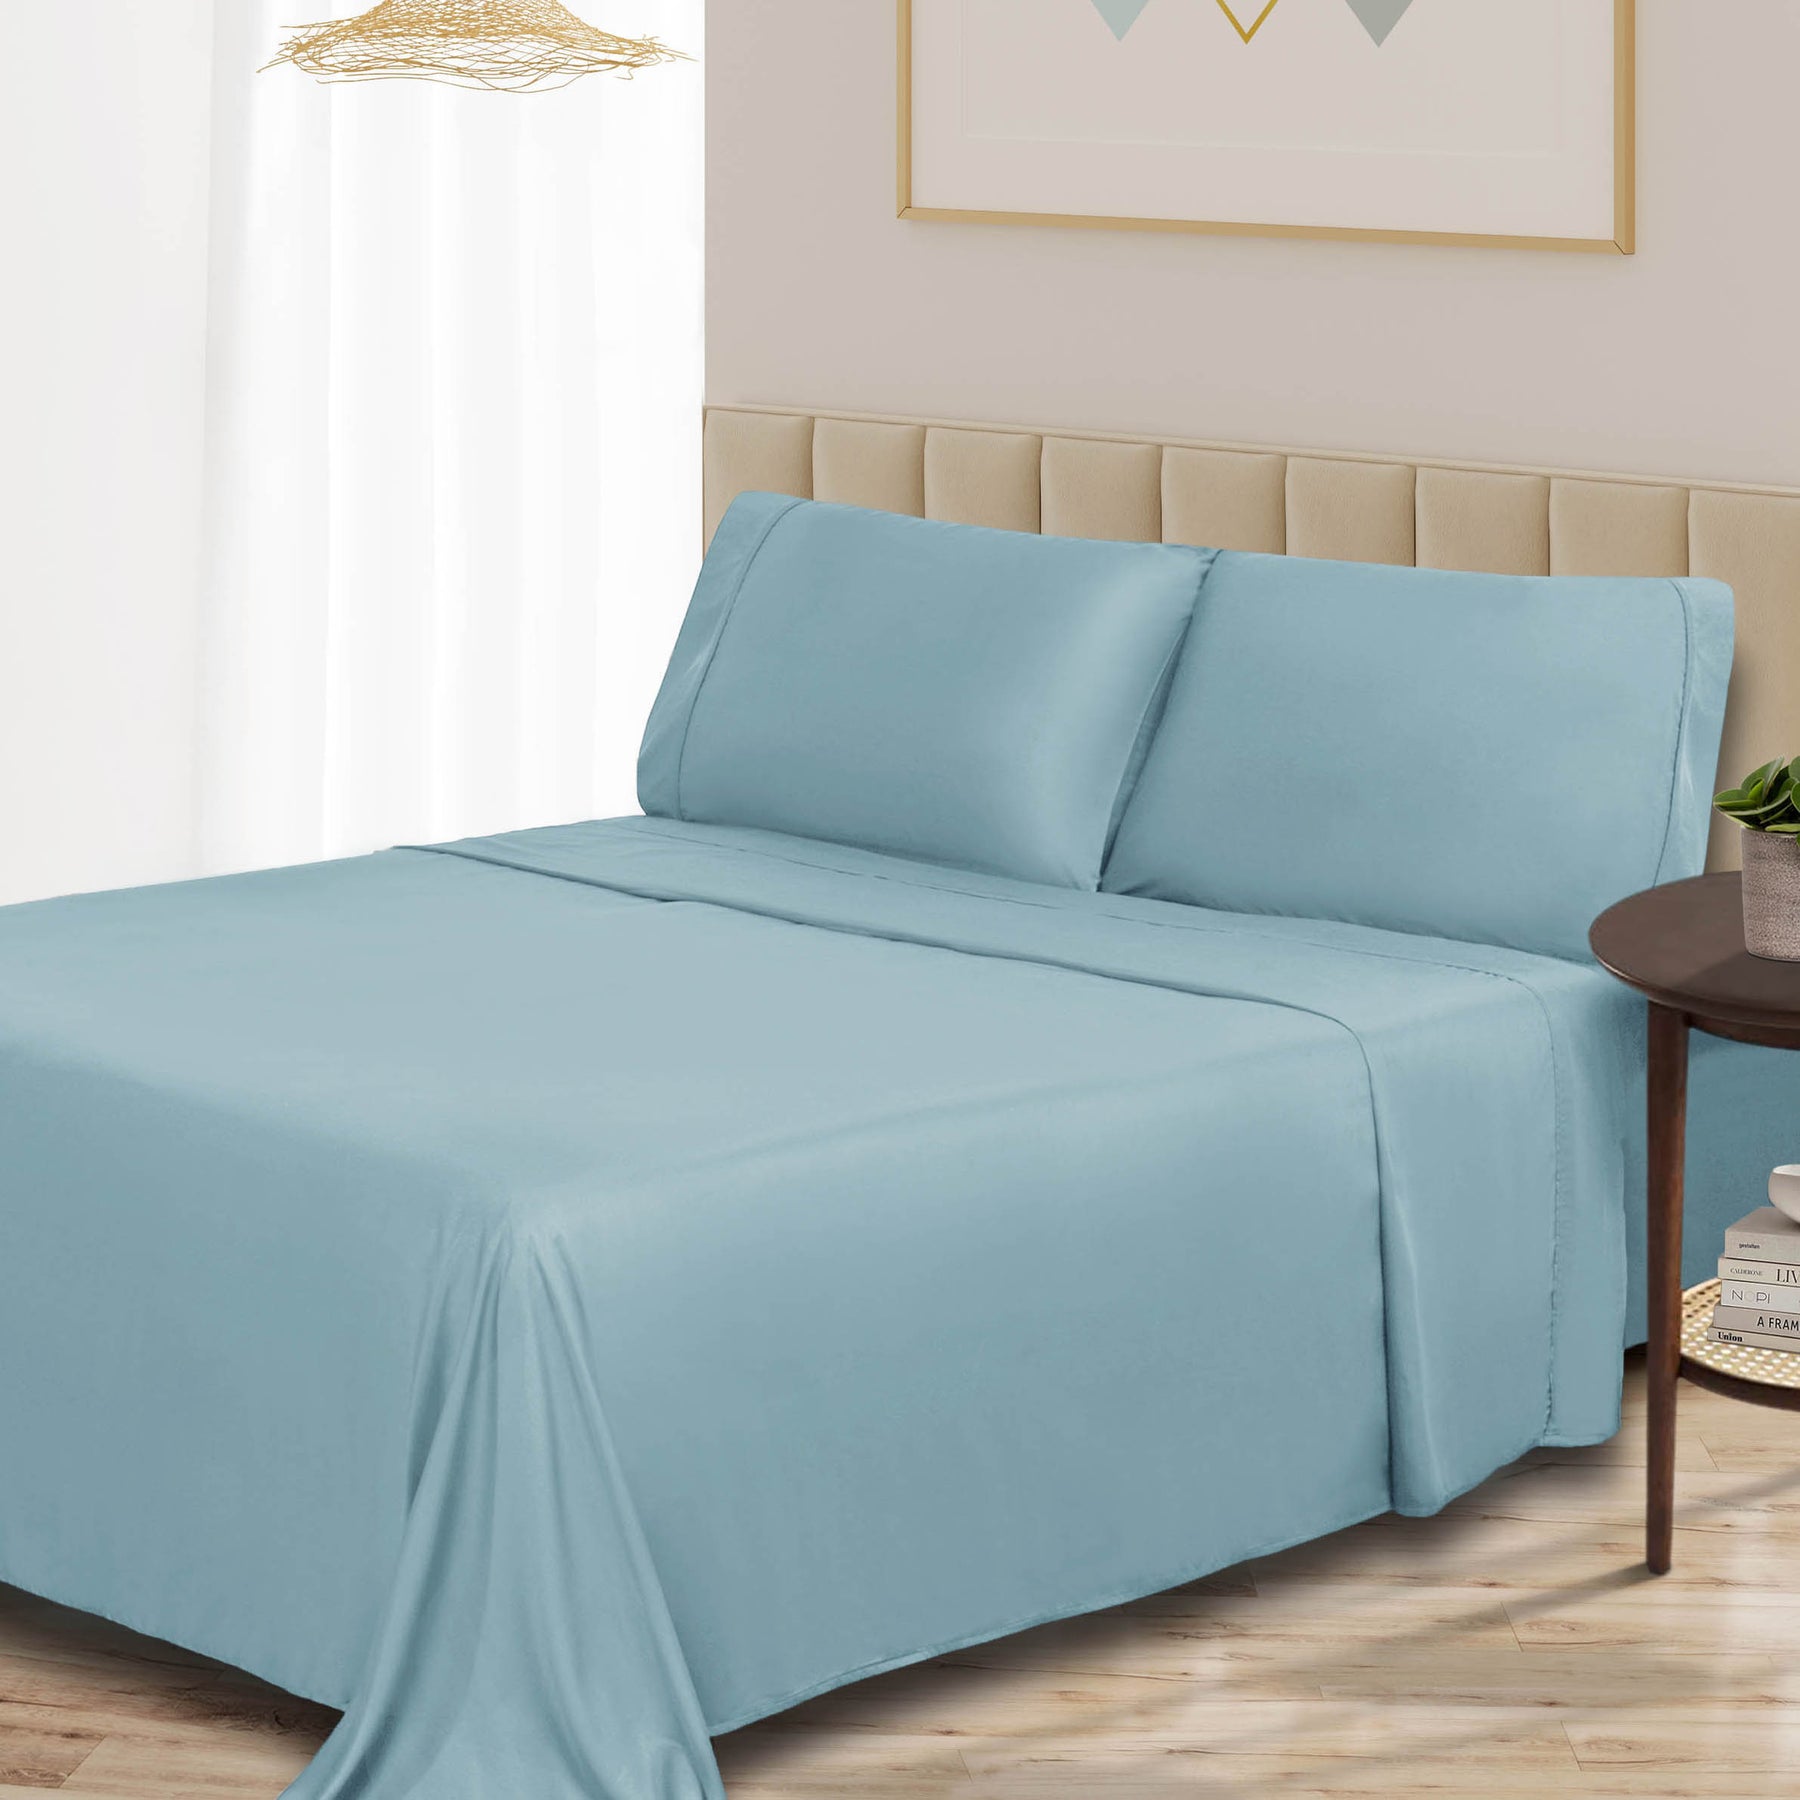 300 Thread Count Rayon From Bamboo Solid Deep Pocket Sheet Set - LightBlue